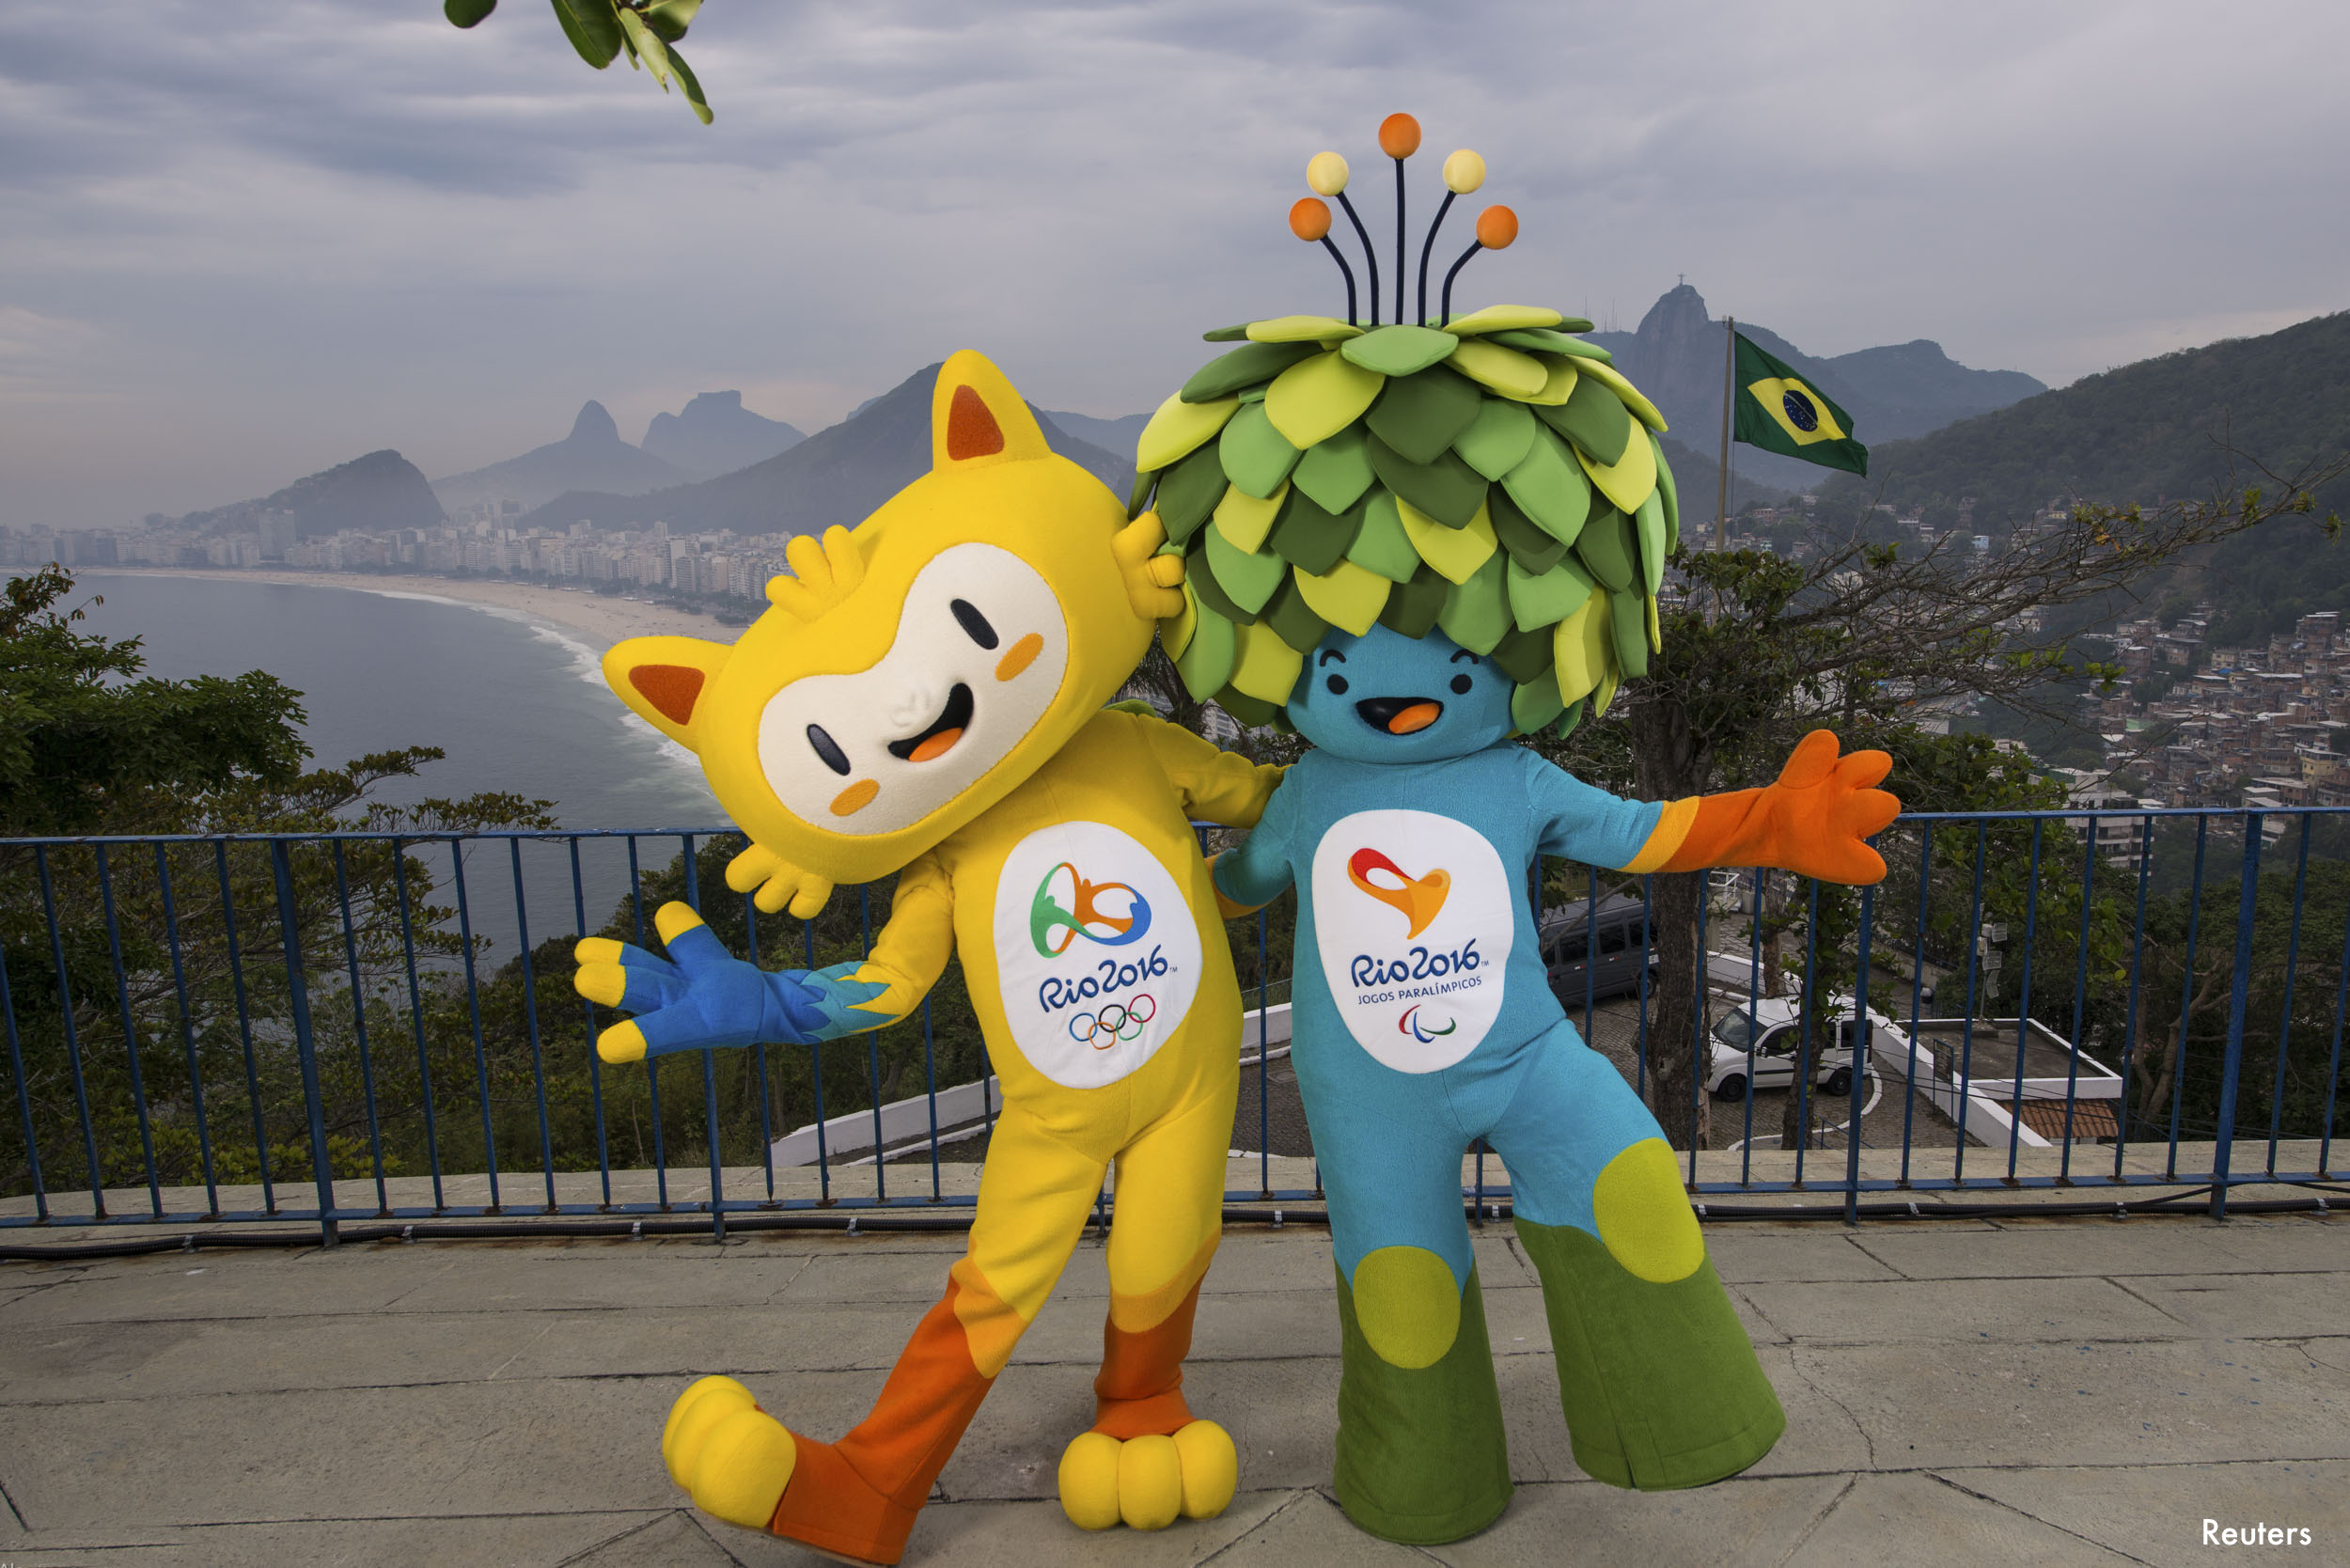 Rio’s 2016 Olympic mascot looks like Anderson Varejao For The Win